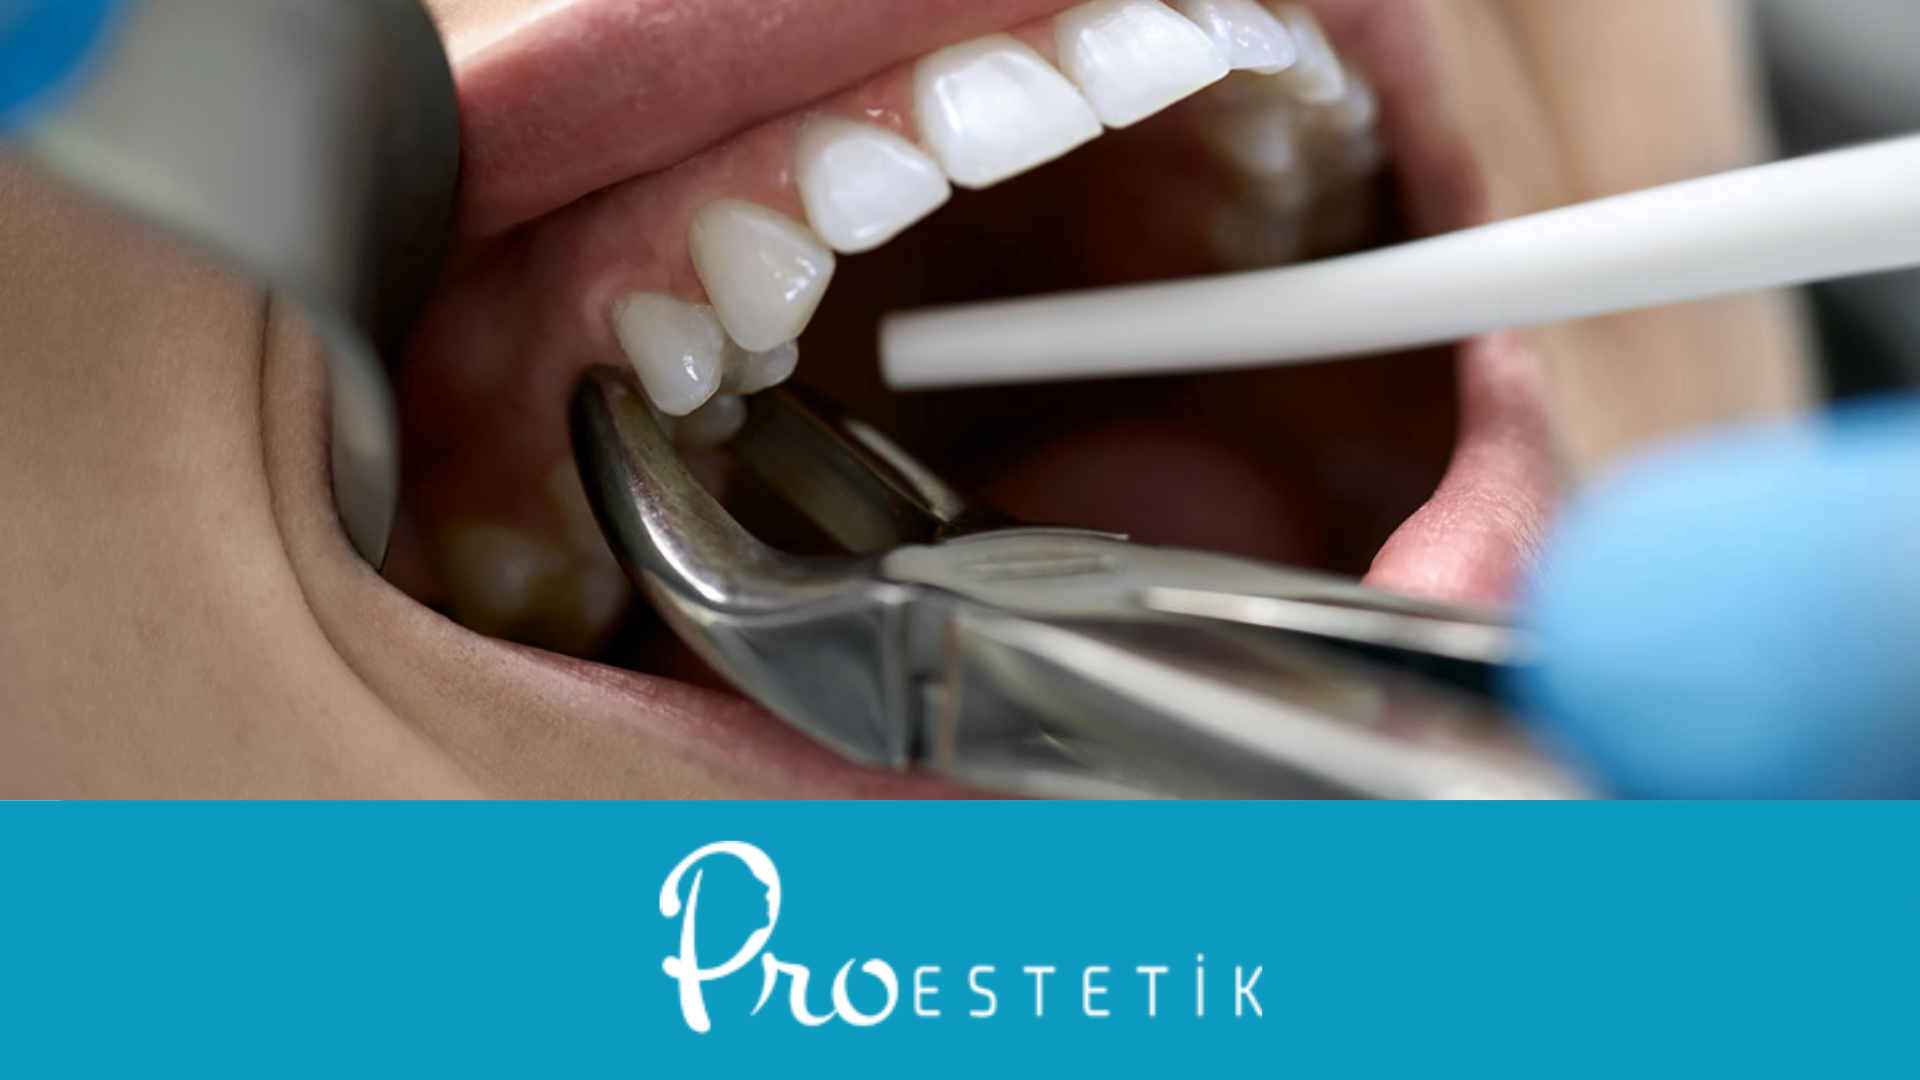 After Tooth Extraction: How to Take Care of Your Mouth